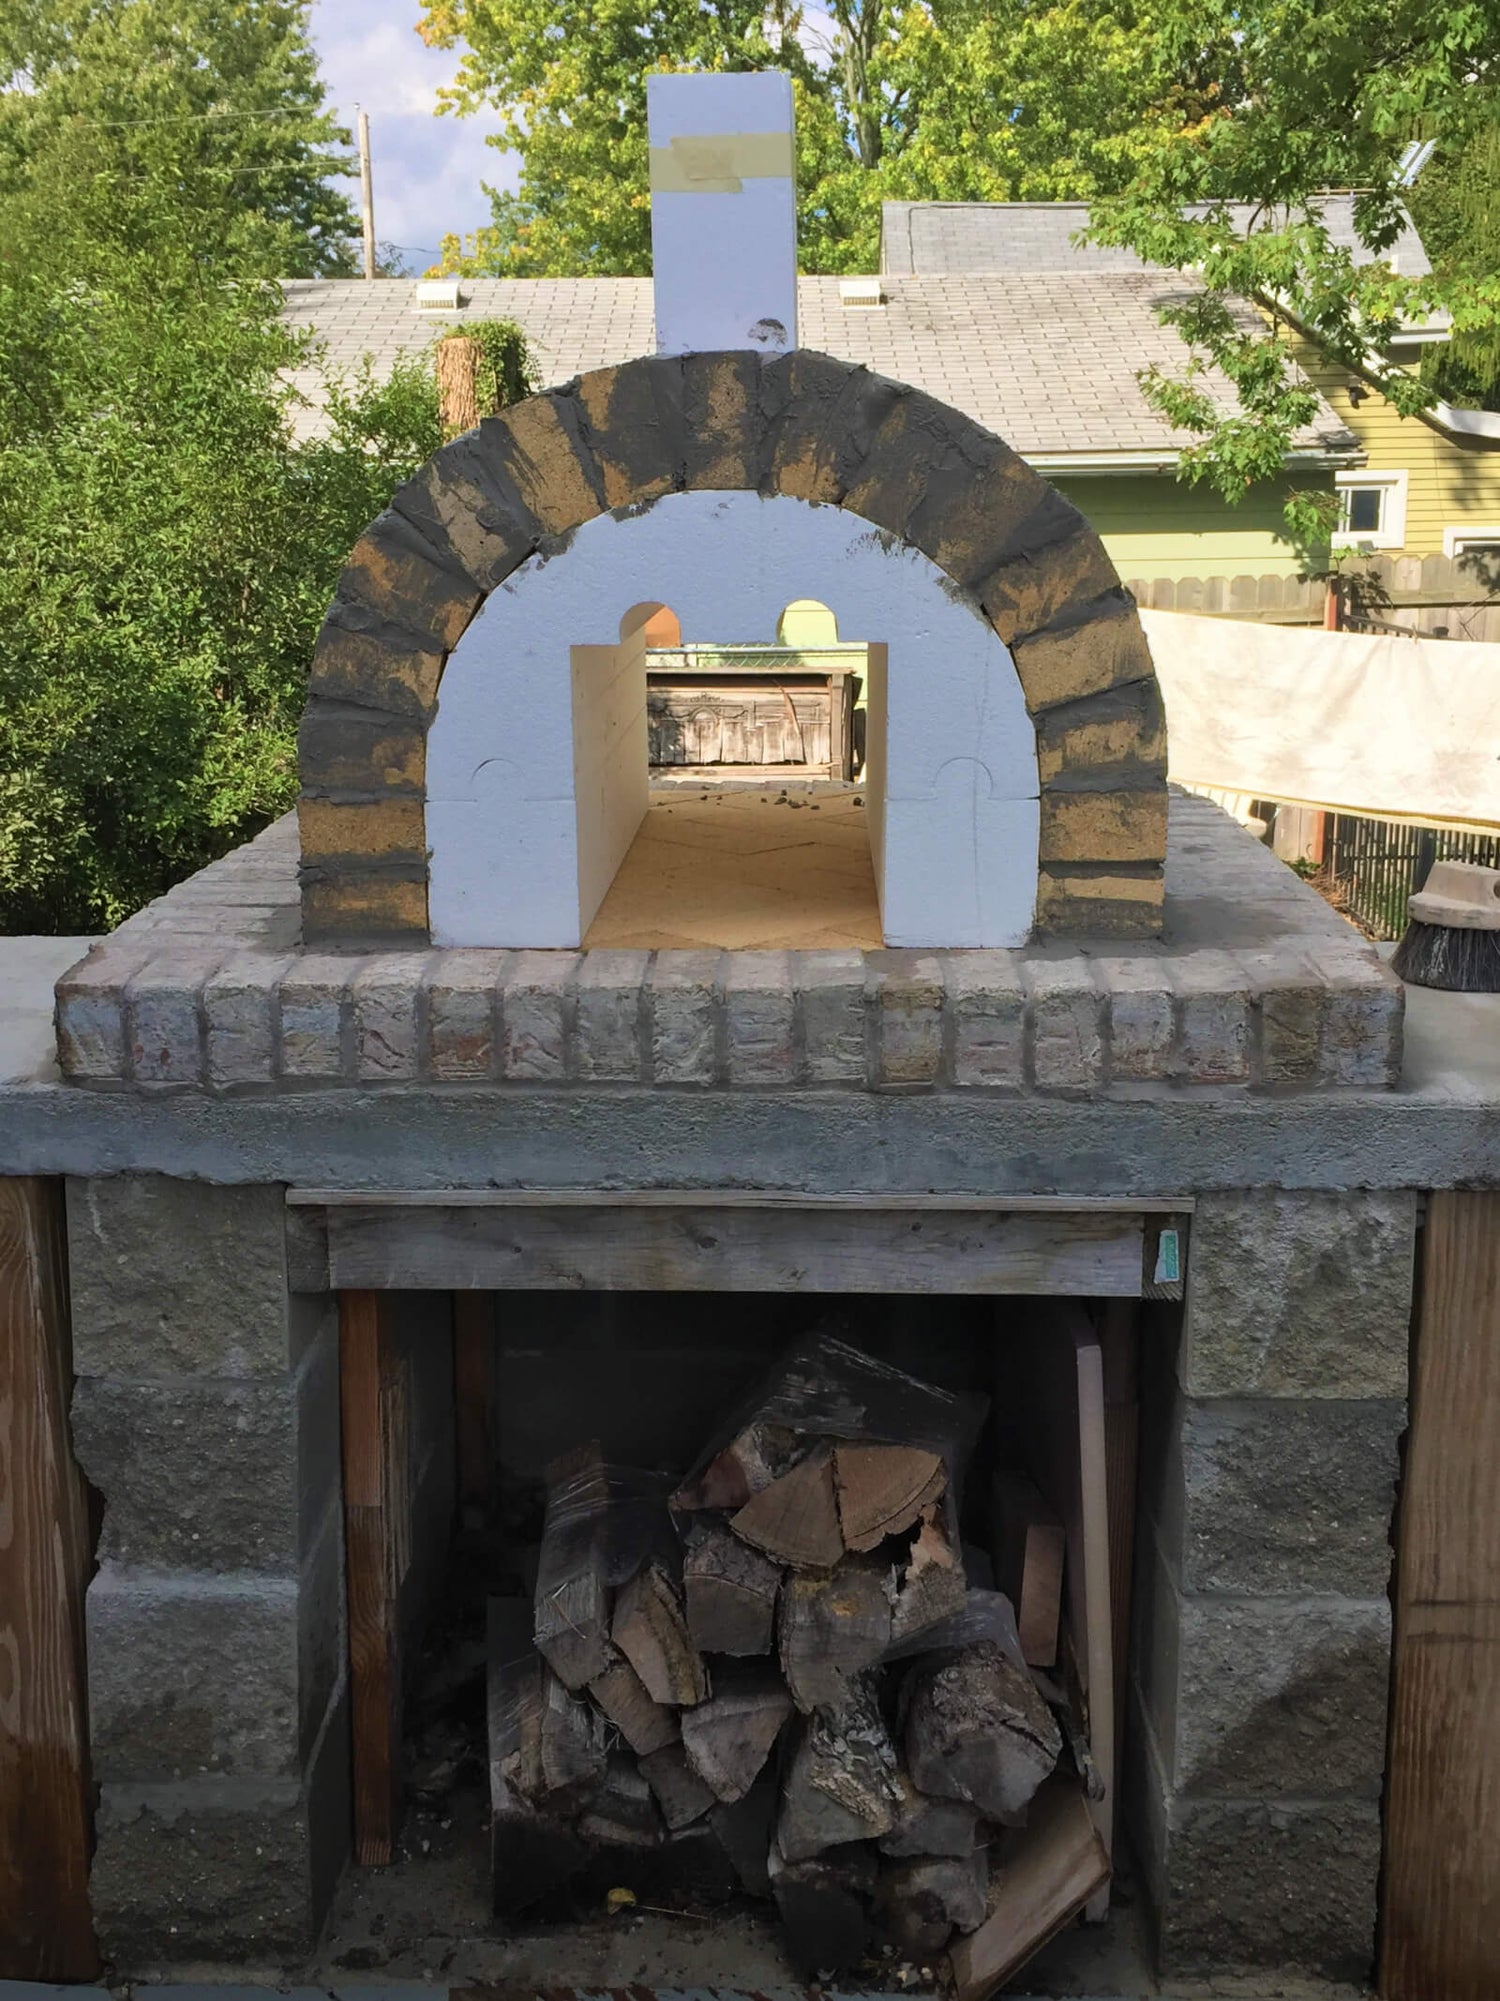 https://cdn.shopify.com/s/files/1/0568/6758/6256/t/9/assets/how-to-build-a-brick-pizza-oven-outdoor-4-BKo_1500x.JPG?v=1666799910